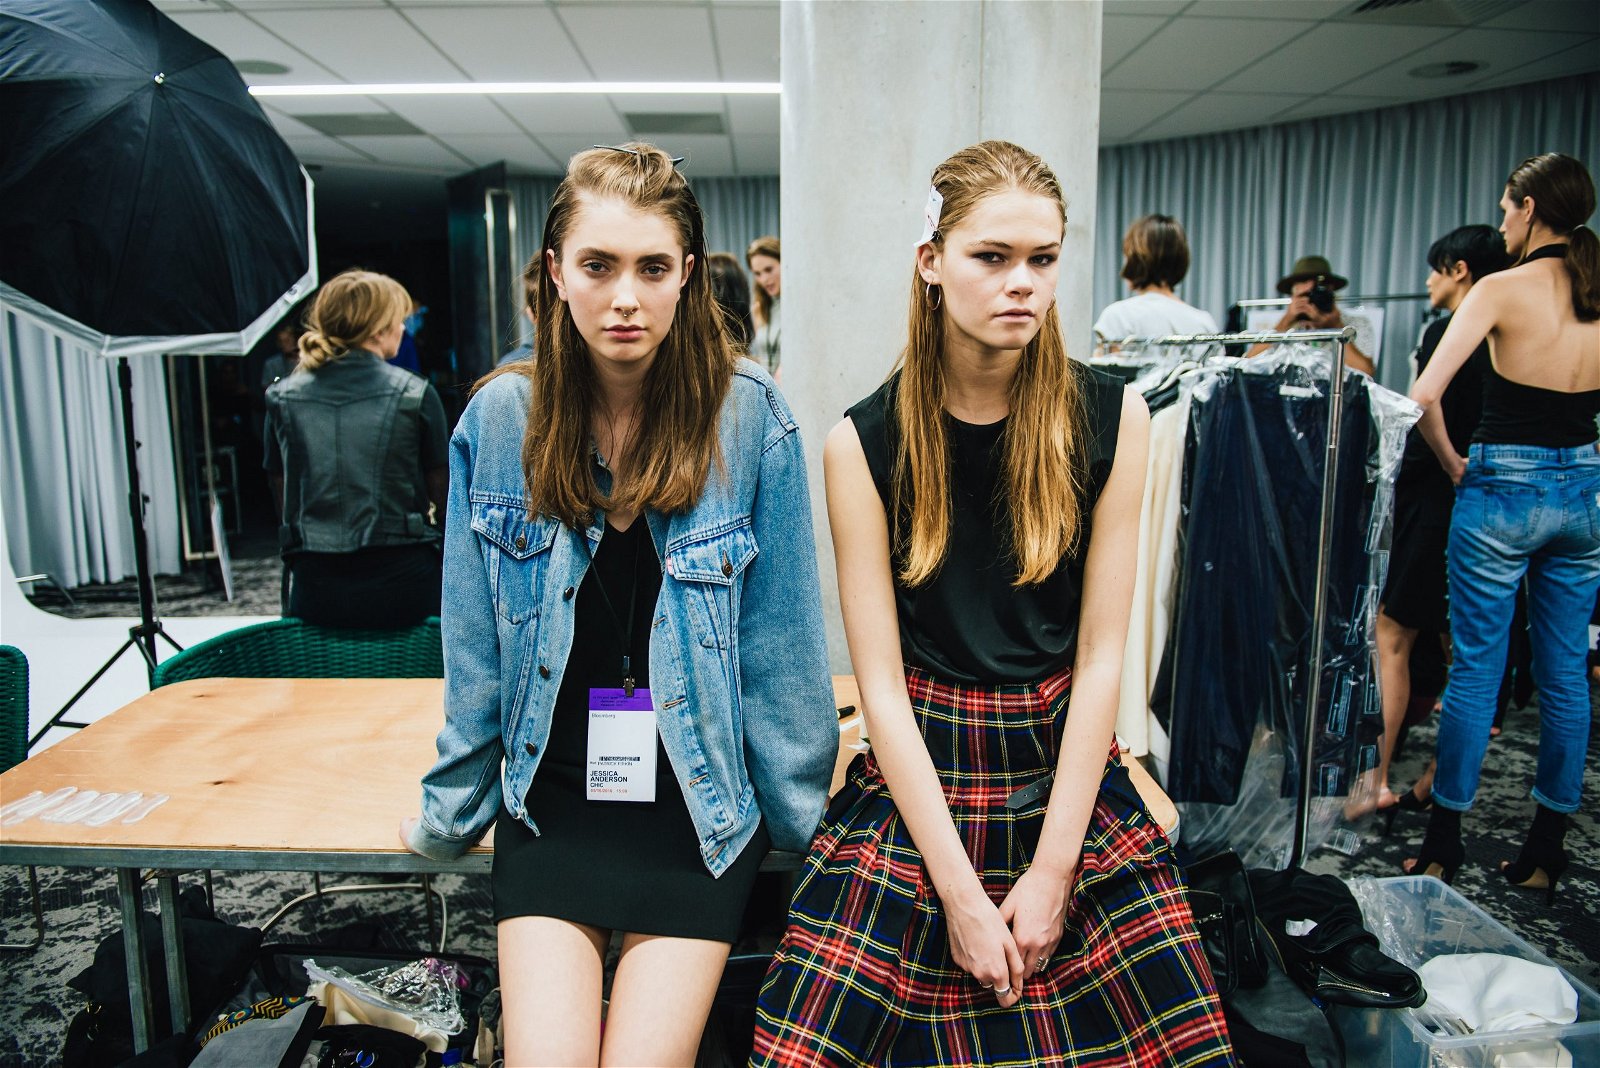 Models on Backstage - picture from Flaunter